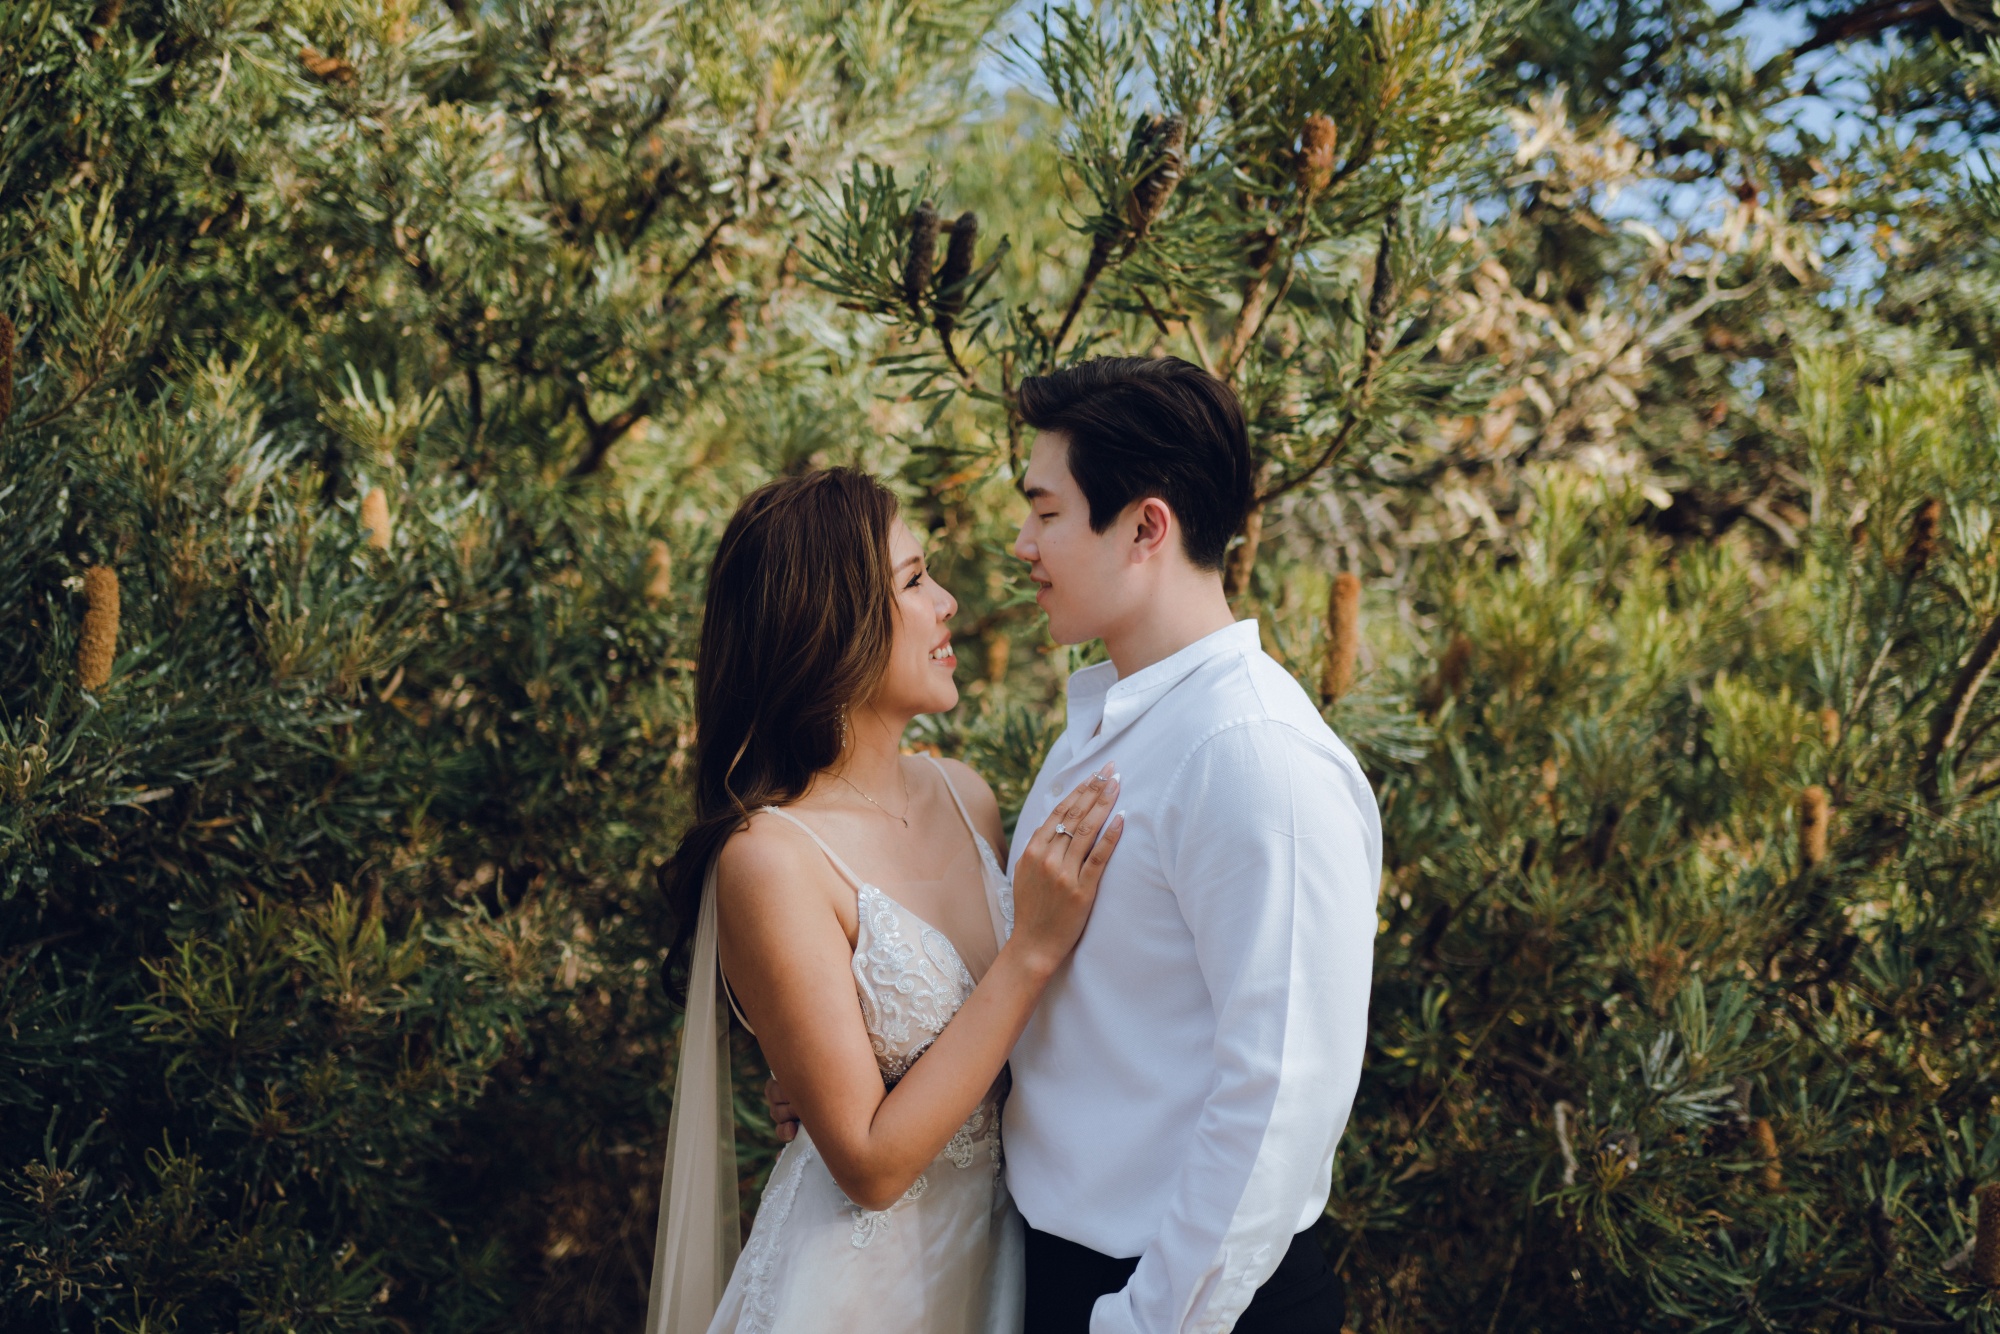 Capturing Forever in Perth: Jasmine & Kamui's Pre-Wedding Story by Jimmy on OneThreeOneFour 9